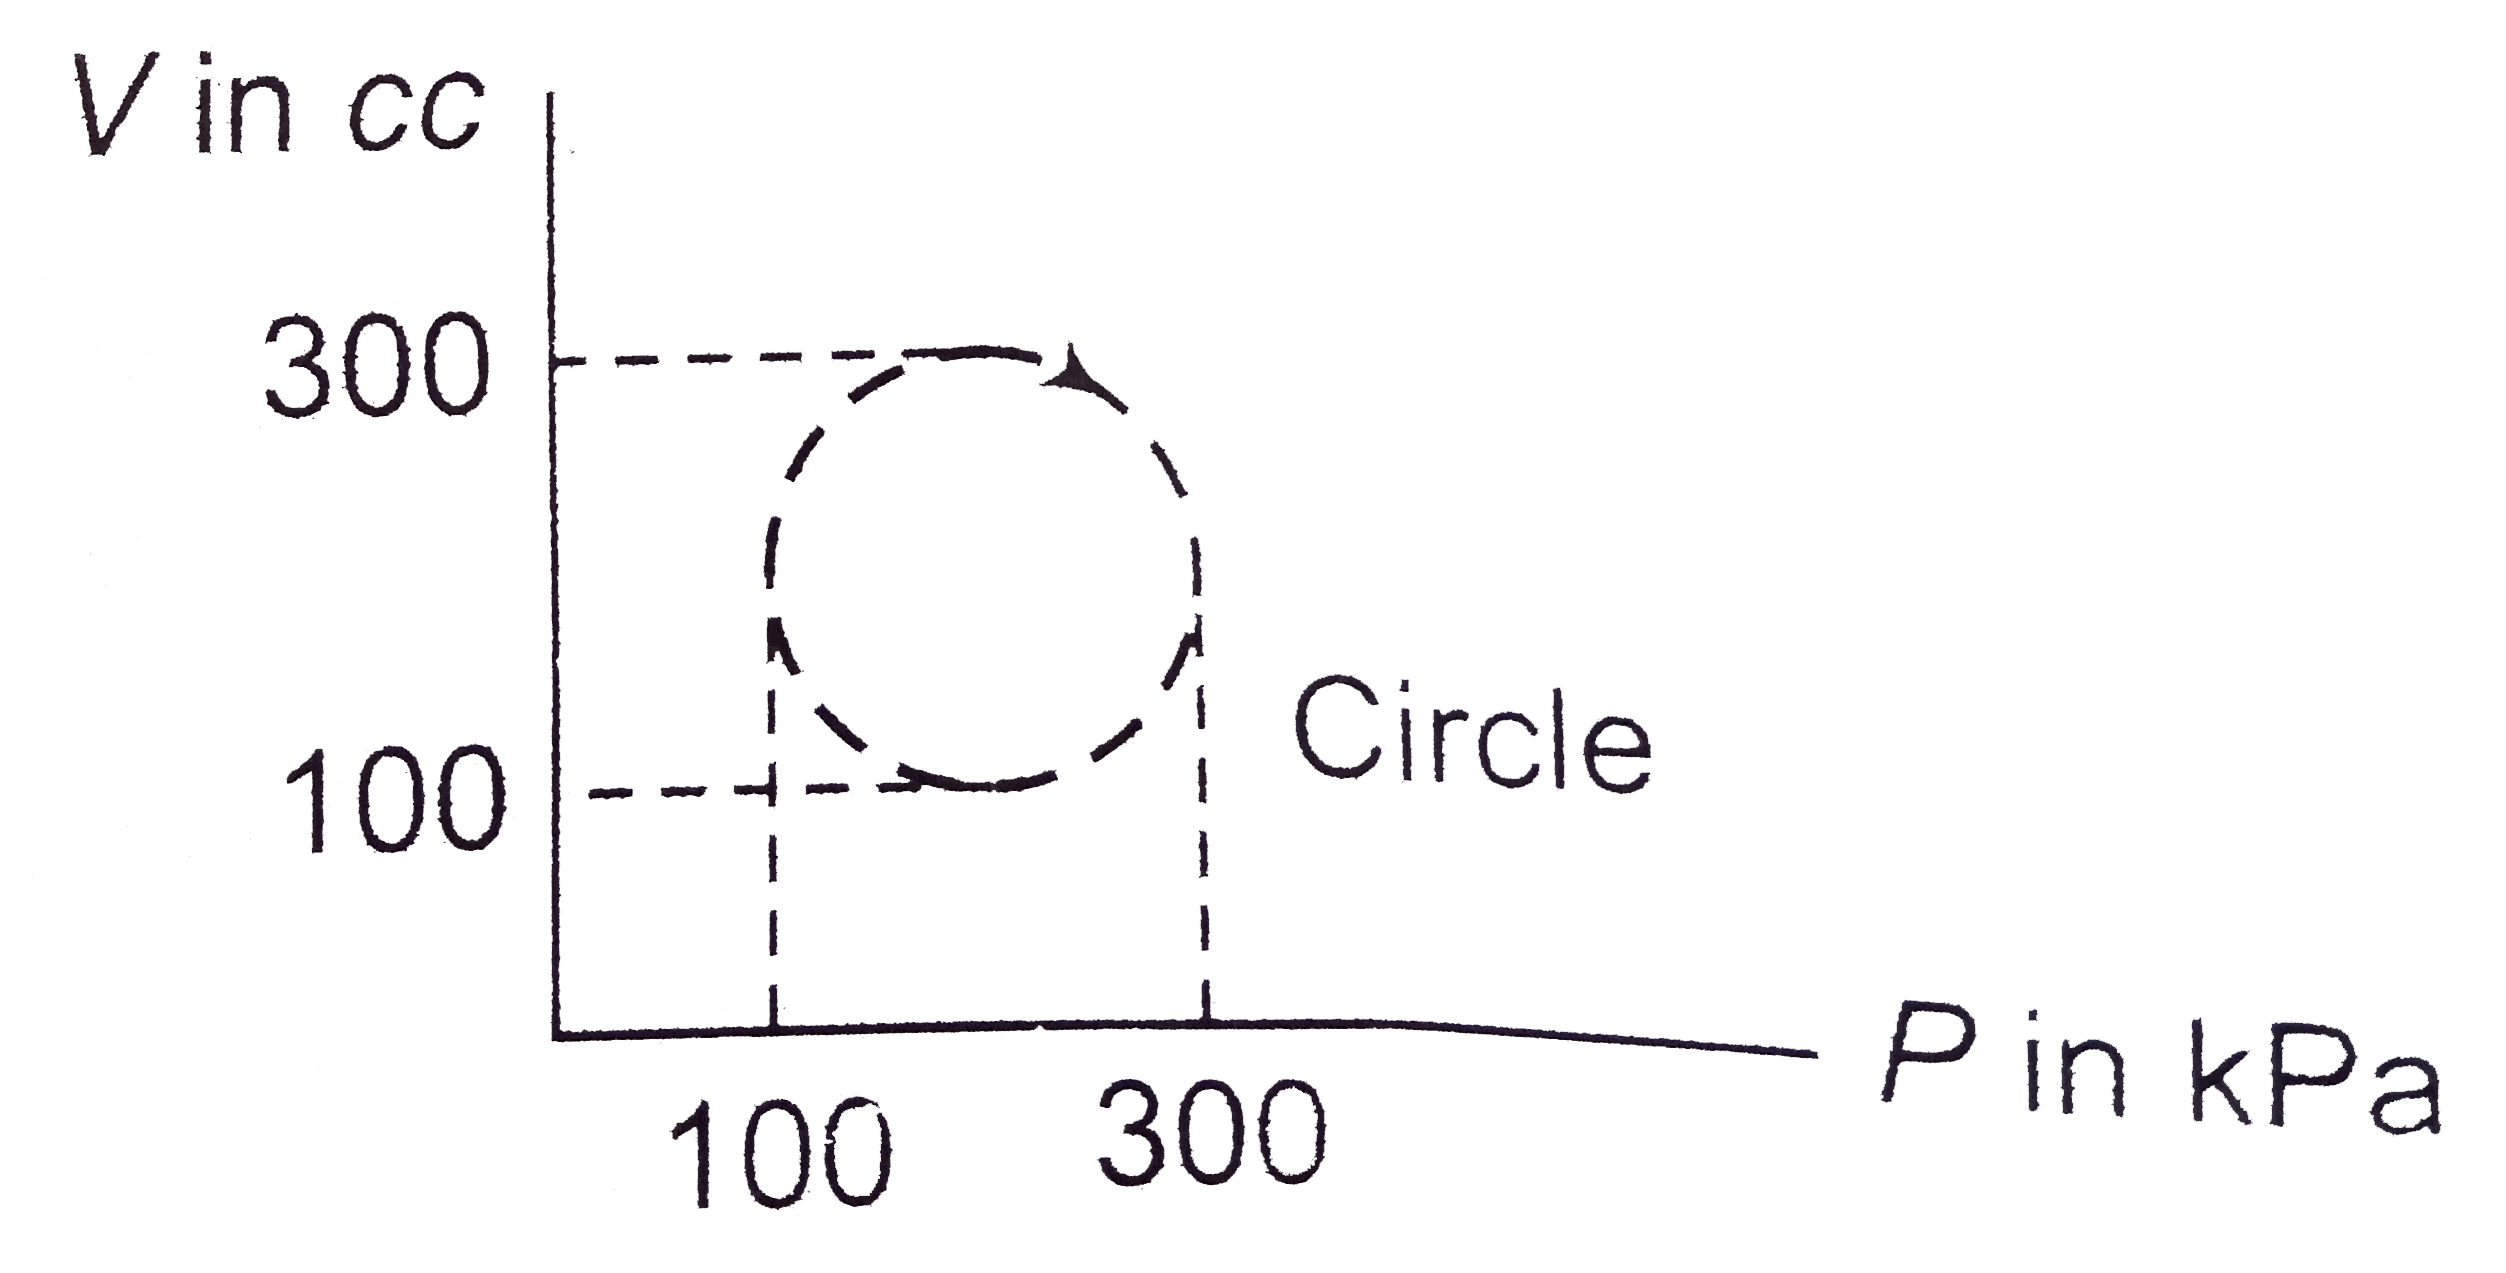 Calculate the heat rejected by a system in going through the cyclic process shown in figure.